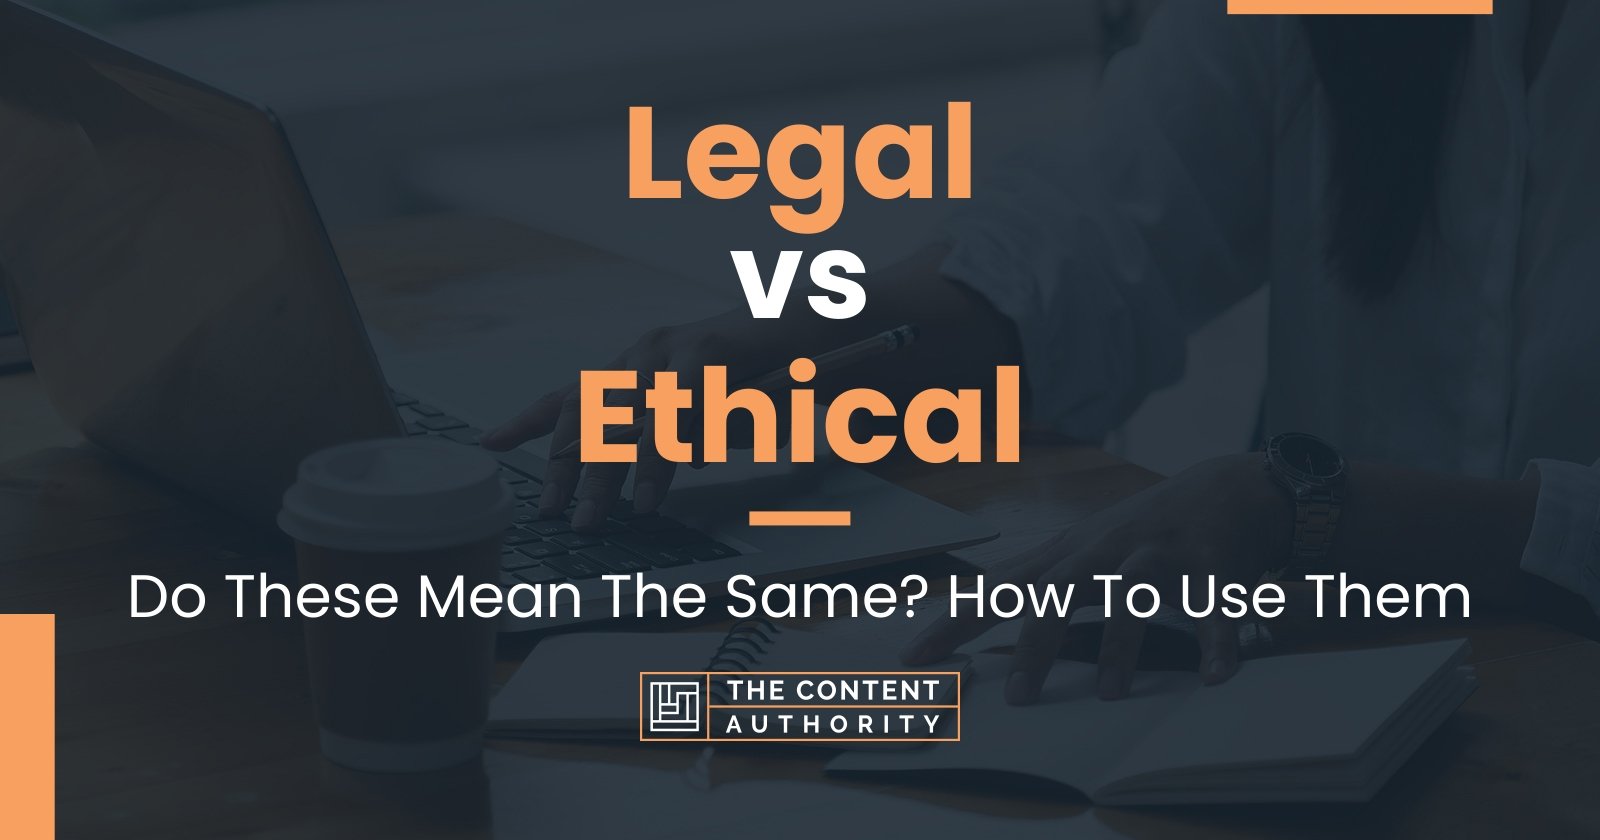 Legal vs Ethical: Do These Mean The Same? How To Use Them